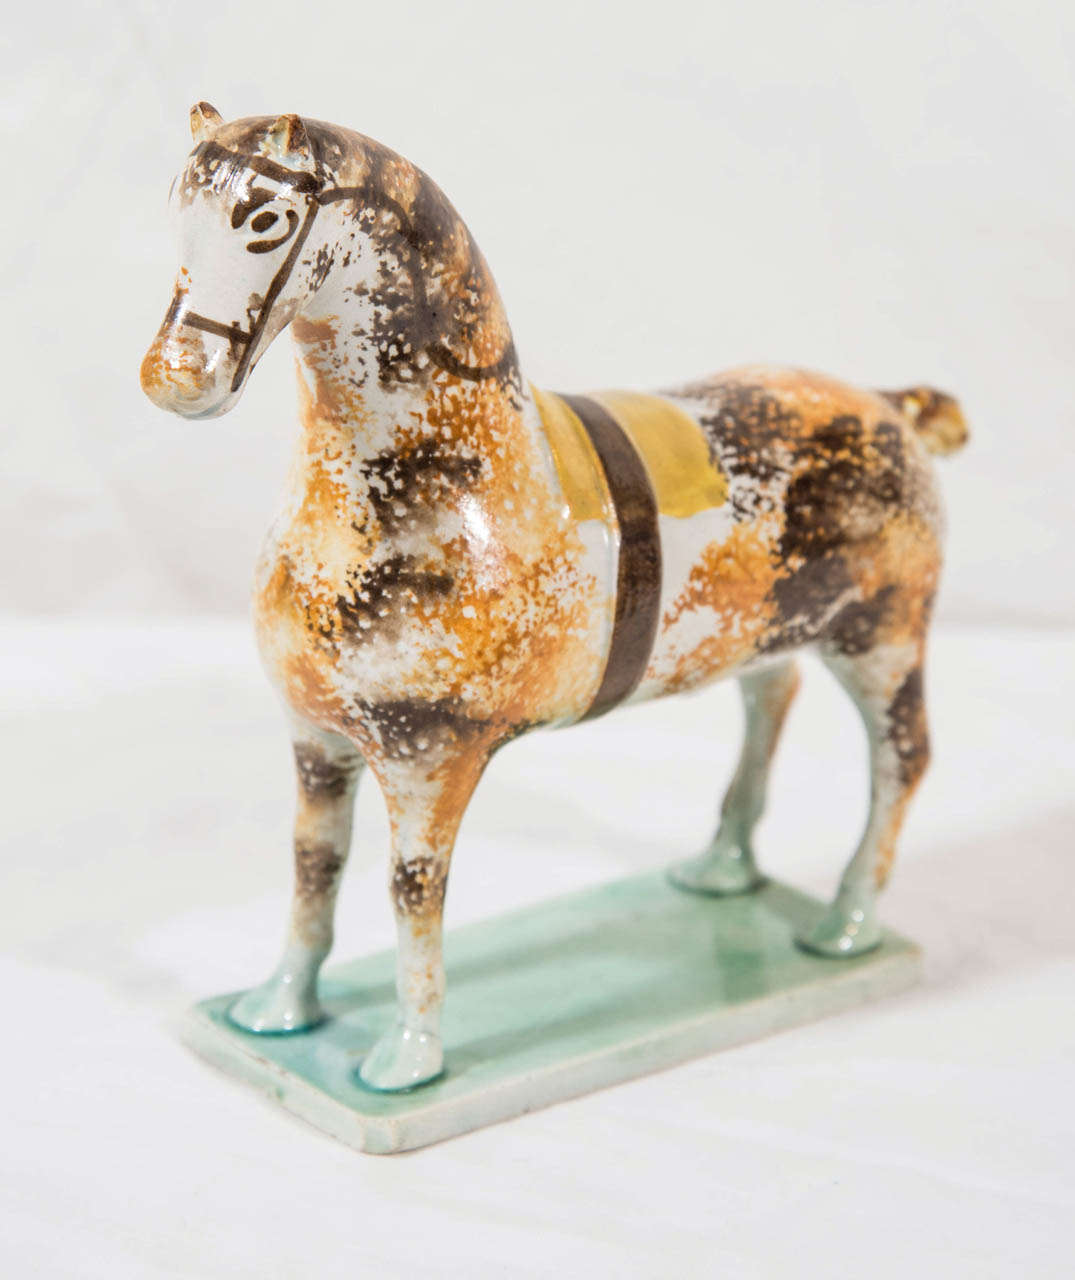 Provenance: With paper label for DM & P Manheim Antiques
An early Staffordshire, Pratt type figure of a horse, sponged and splashed with dappled decoration of manganese and ochre.
He stands on a flat green base with ears pricked and a docked tail.